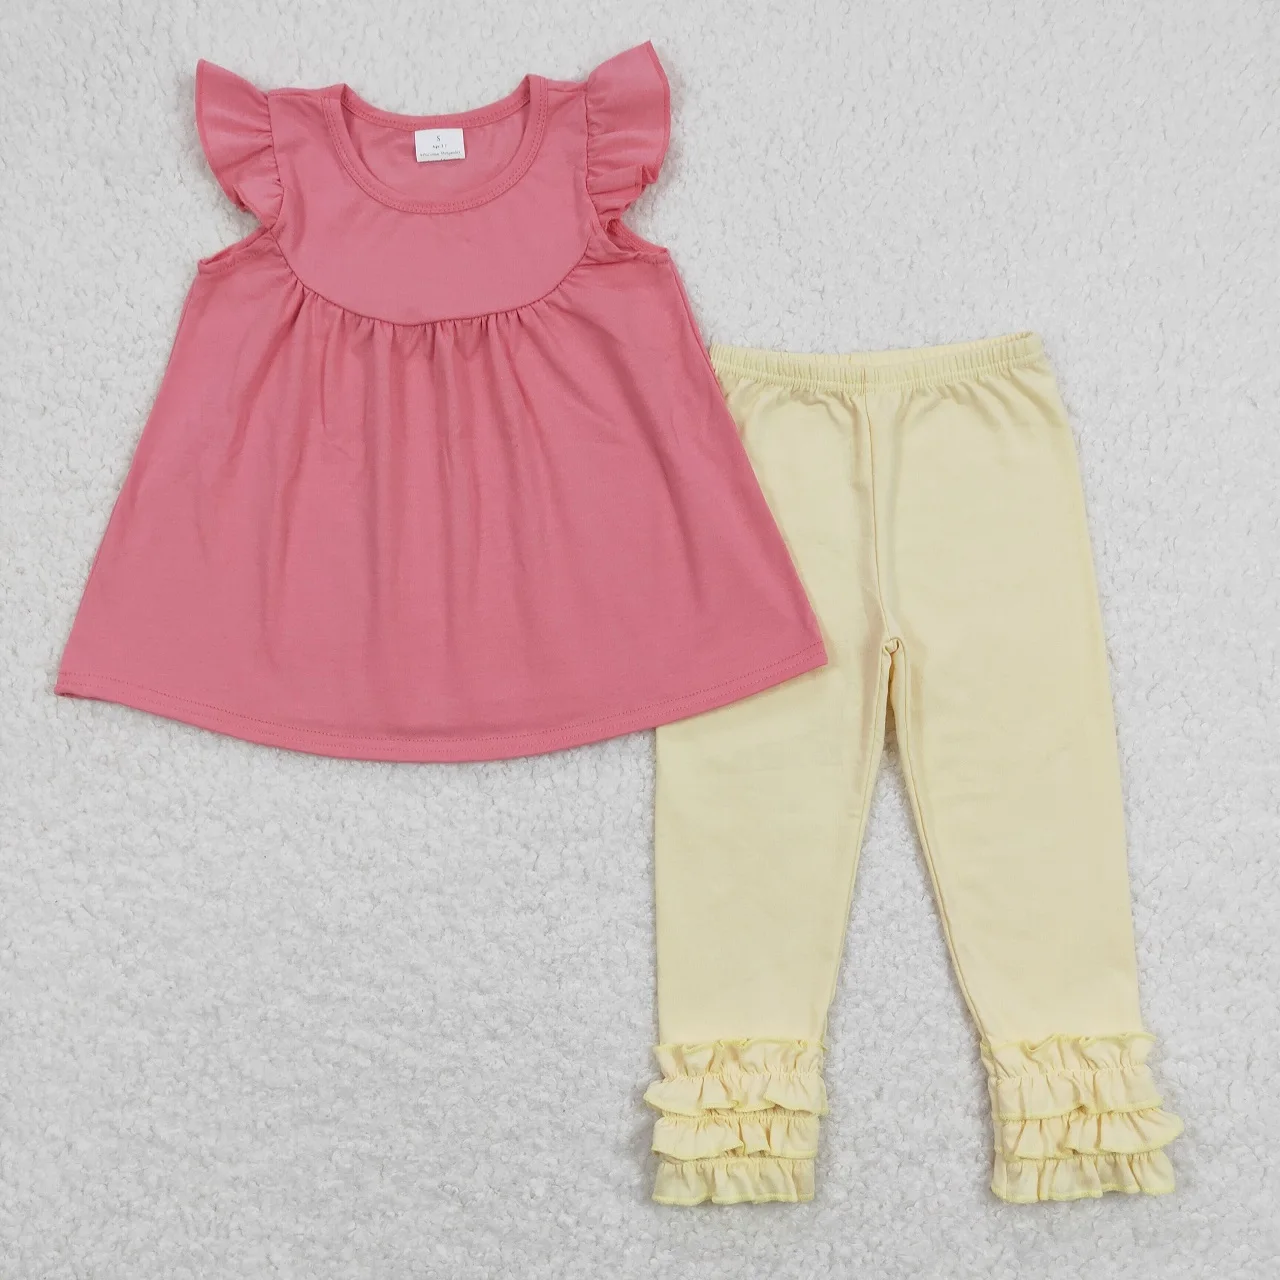 

Wholesale Children Kids Infant Sets Baby Girl Pink Short Sleeves Tunic Tops Ruffle Pants Toddler Cotton Outfit